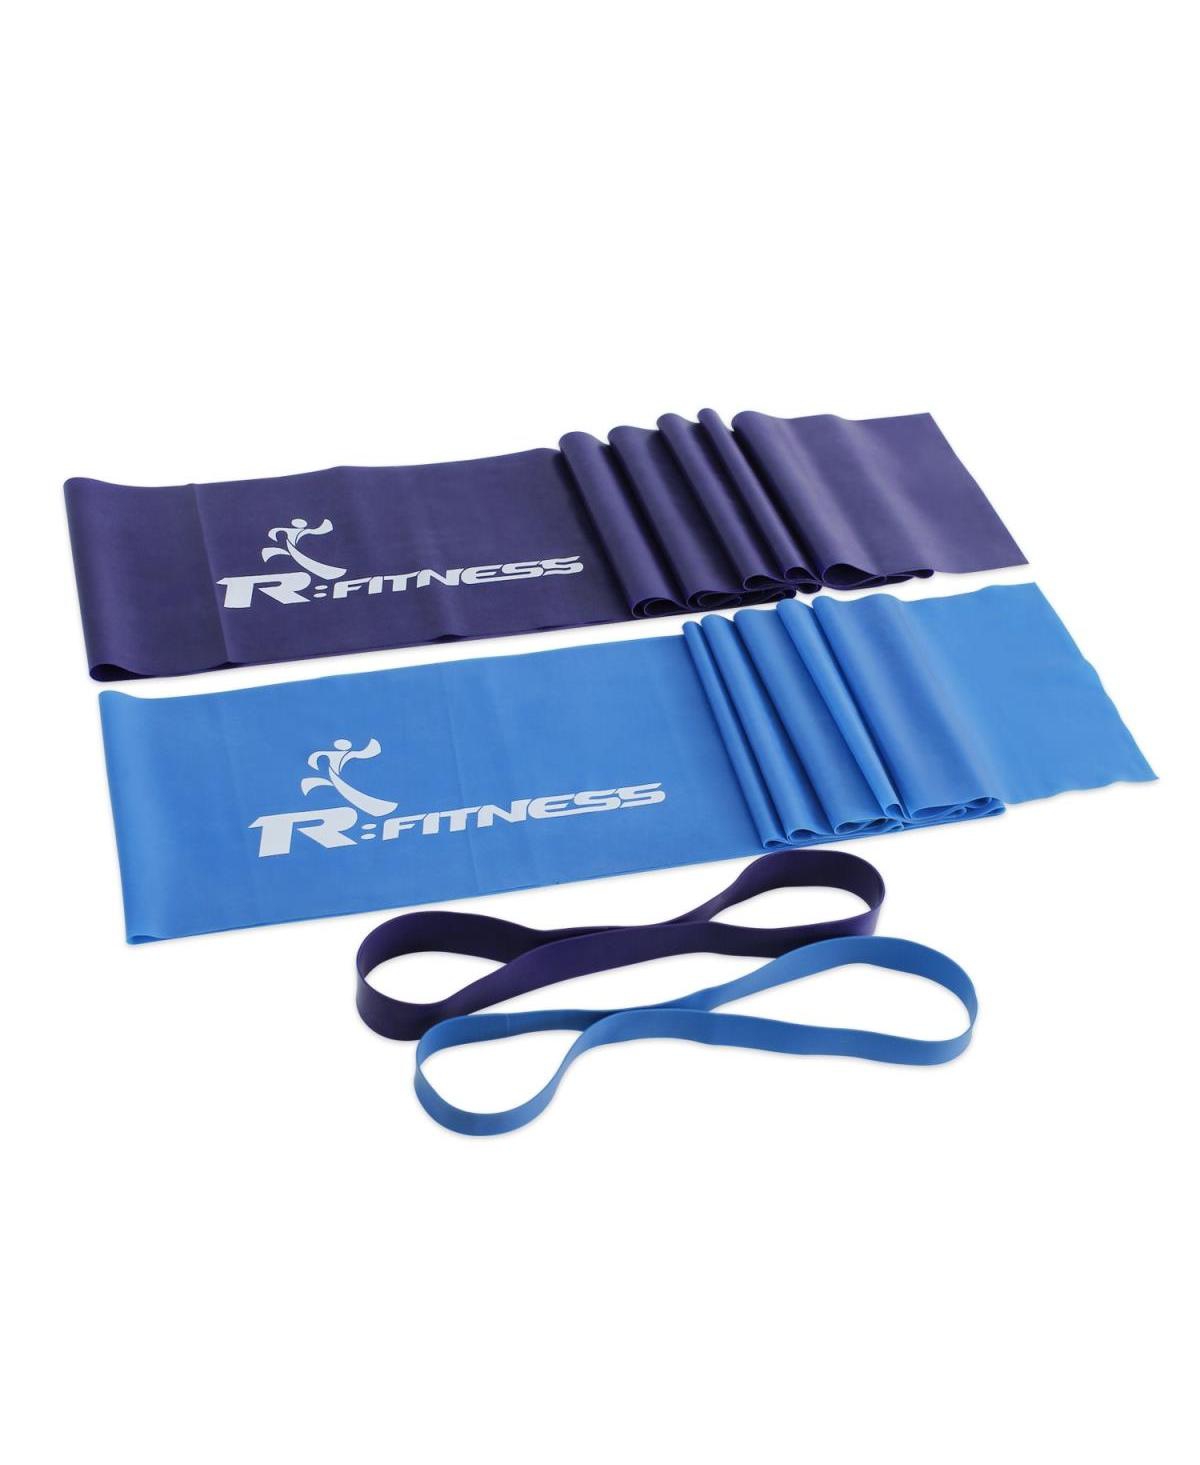 Rfitness Professional Training Exercise Fitness Resistance Band - 4 Piece - Blue